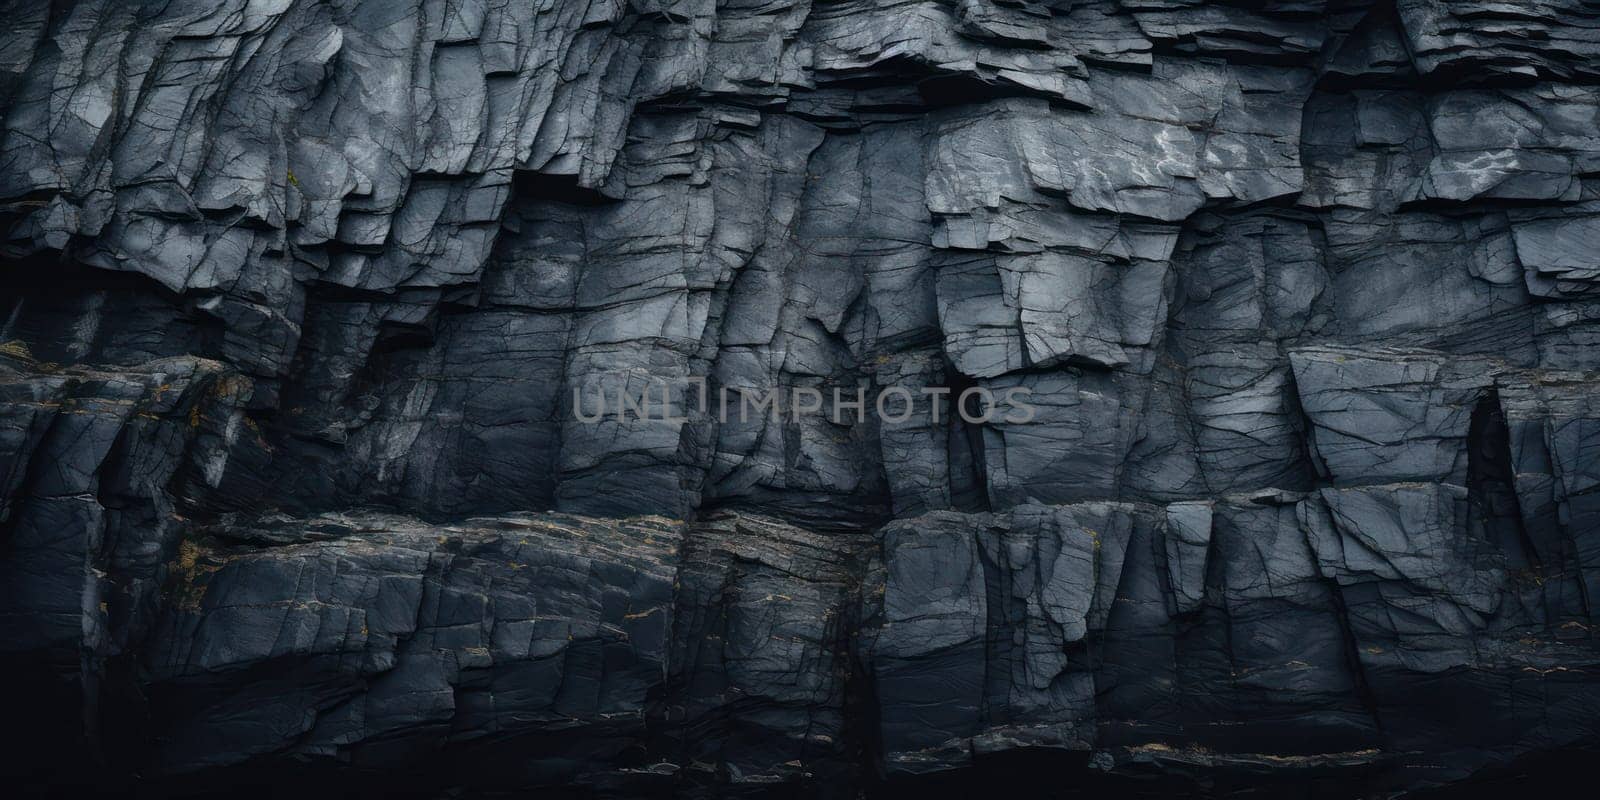 Rough, Textured Rock Surface: A Dark, Ancient Wall of Gray, Hard Stone. by Vichizh